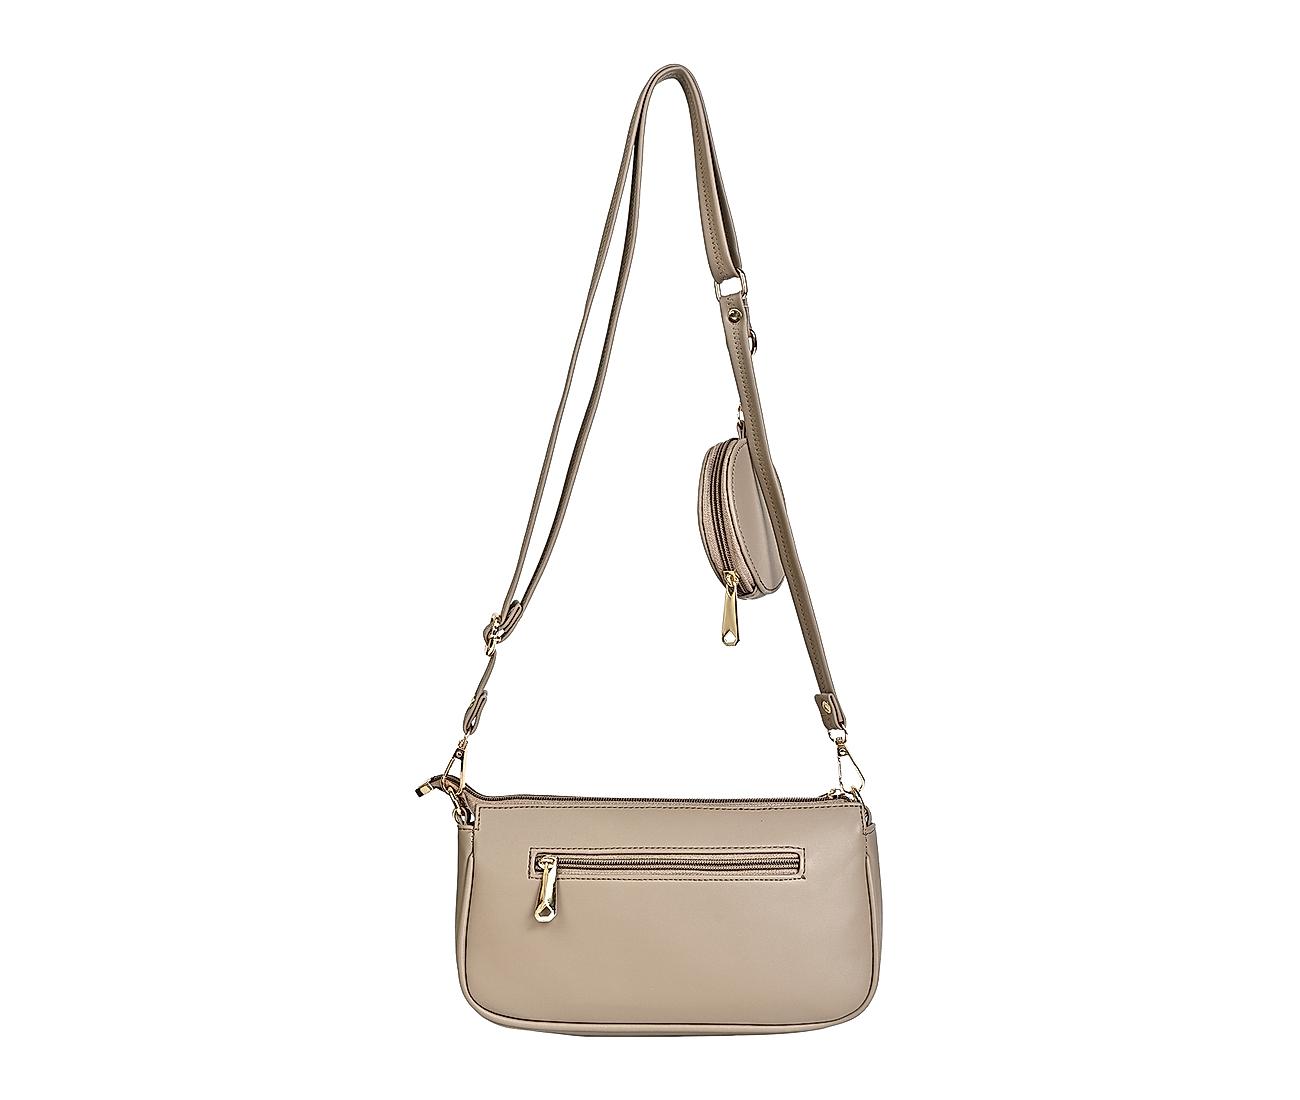 Buy Nude Pink Patent Multi-Compartment Purse from the Next UK online shop